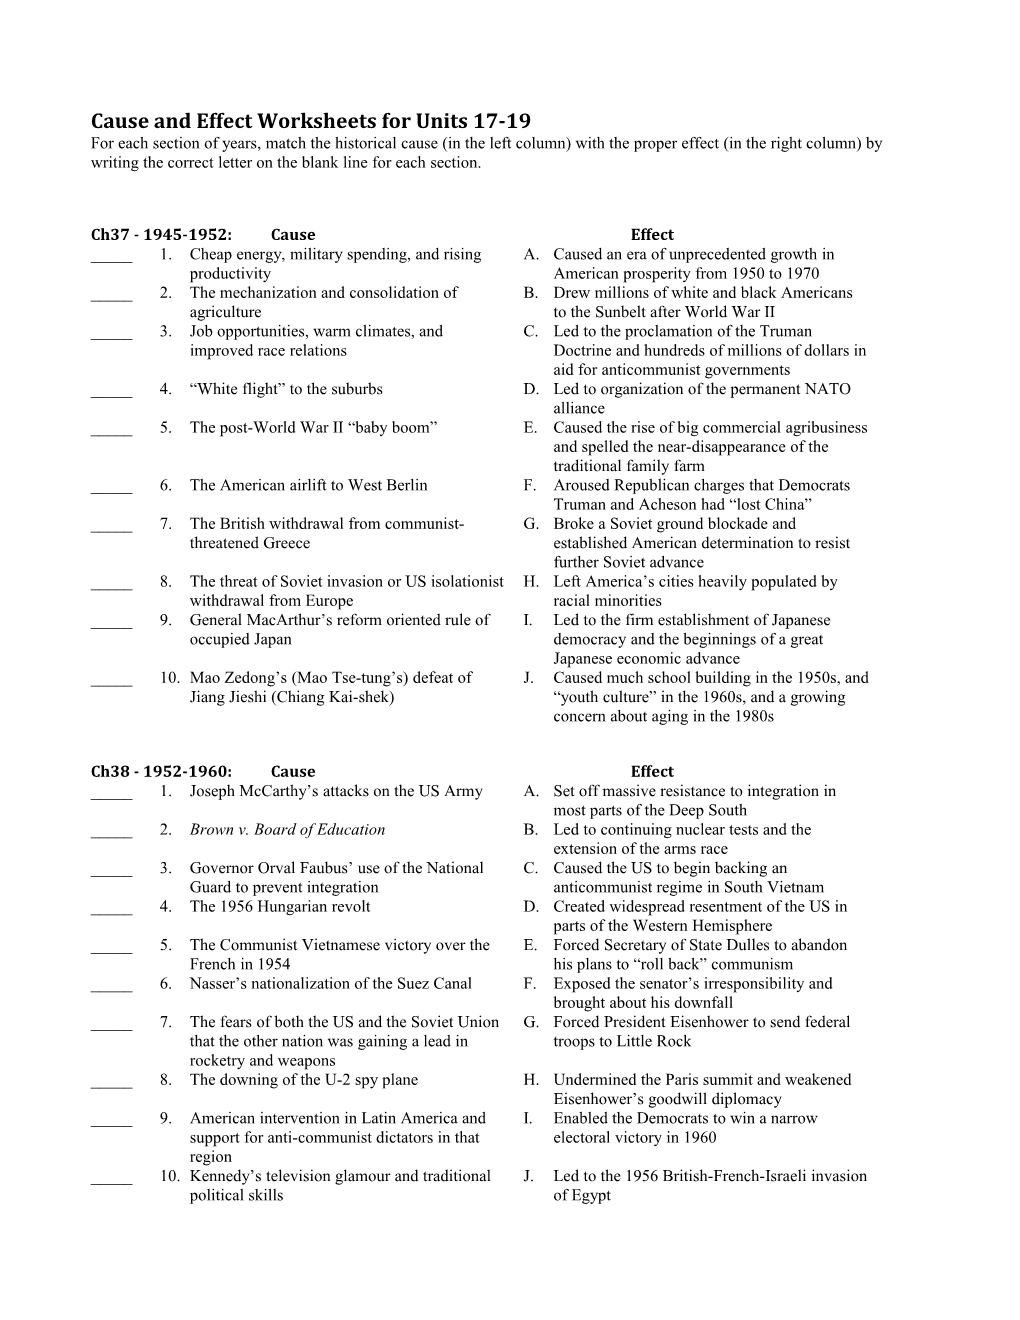 Cause and Effect Worksheets for Units17-19